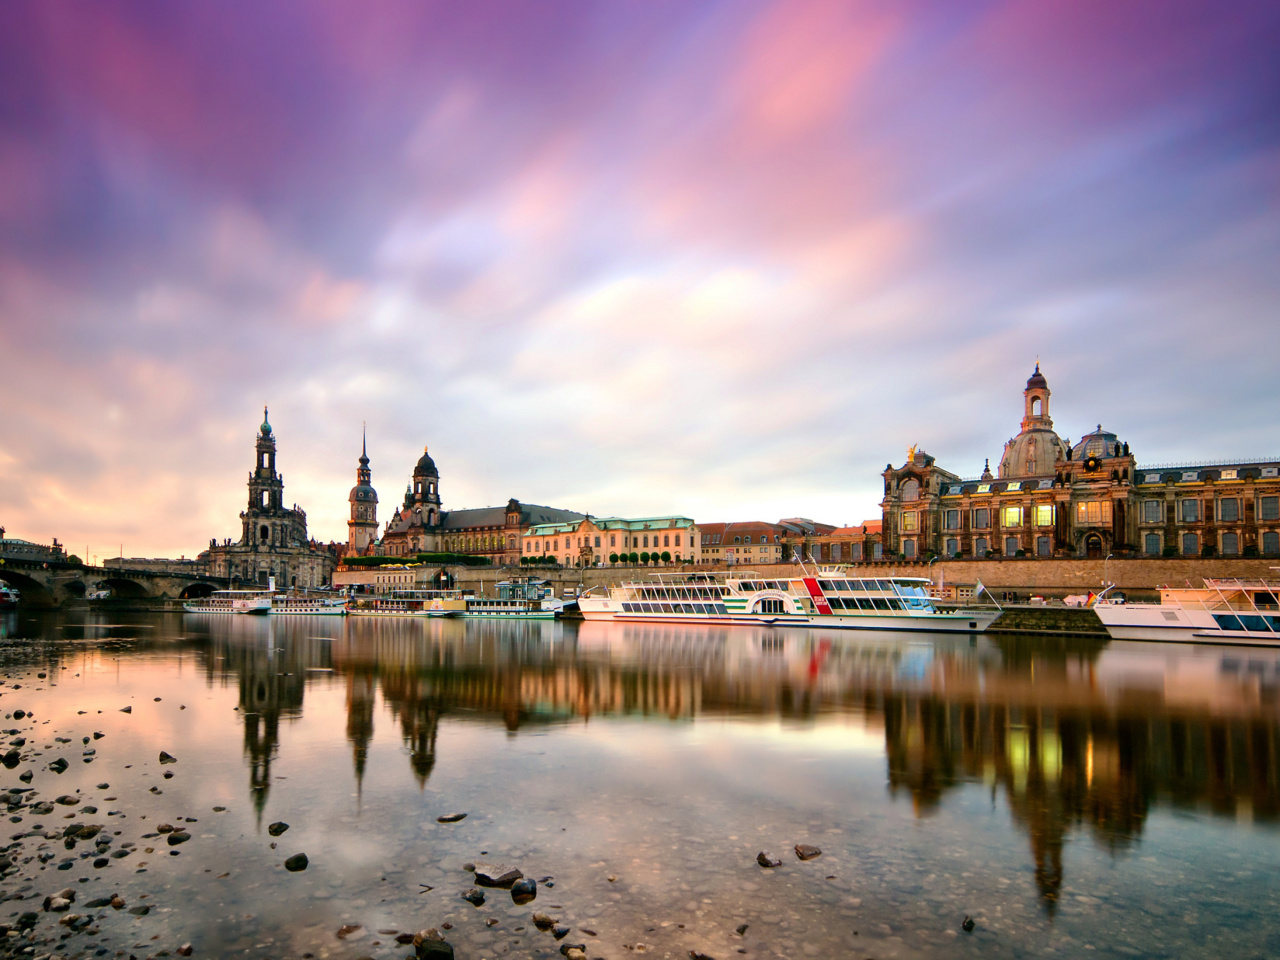 Dresden on Elbe River near Zwinger Palace wallpaper 1280x960